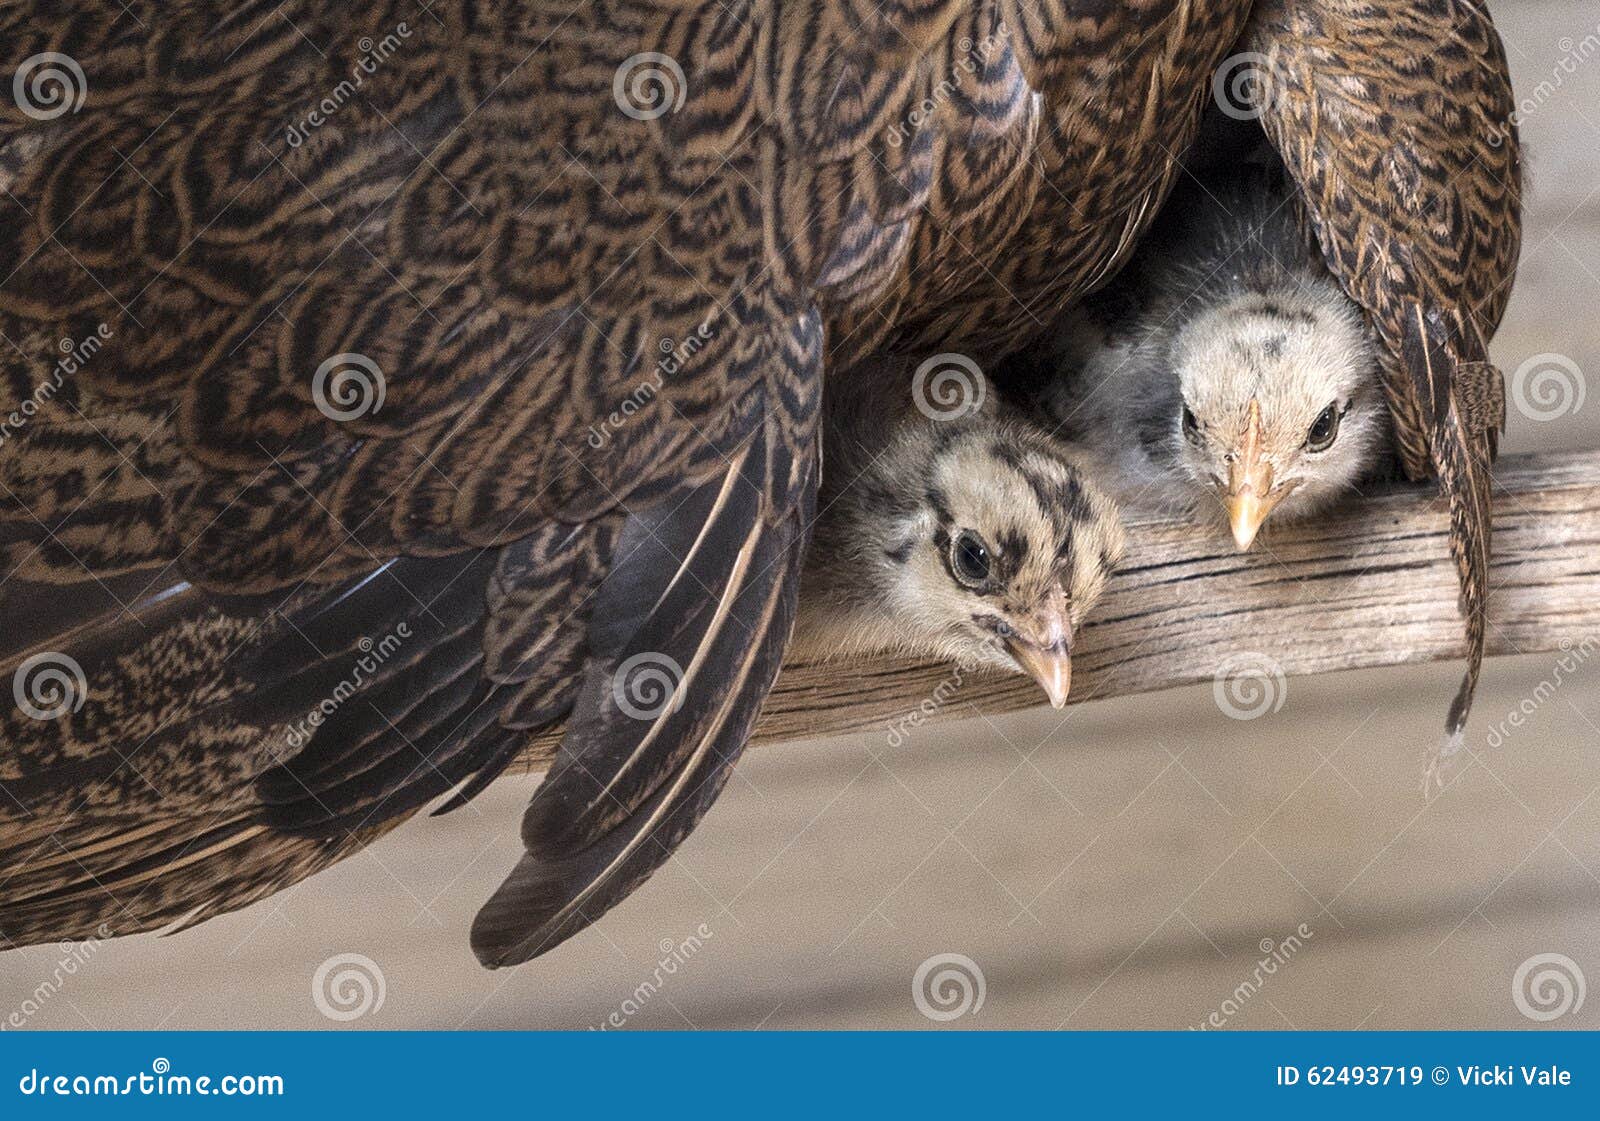 baby chickens under mother hen's wing